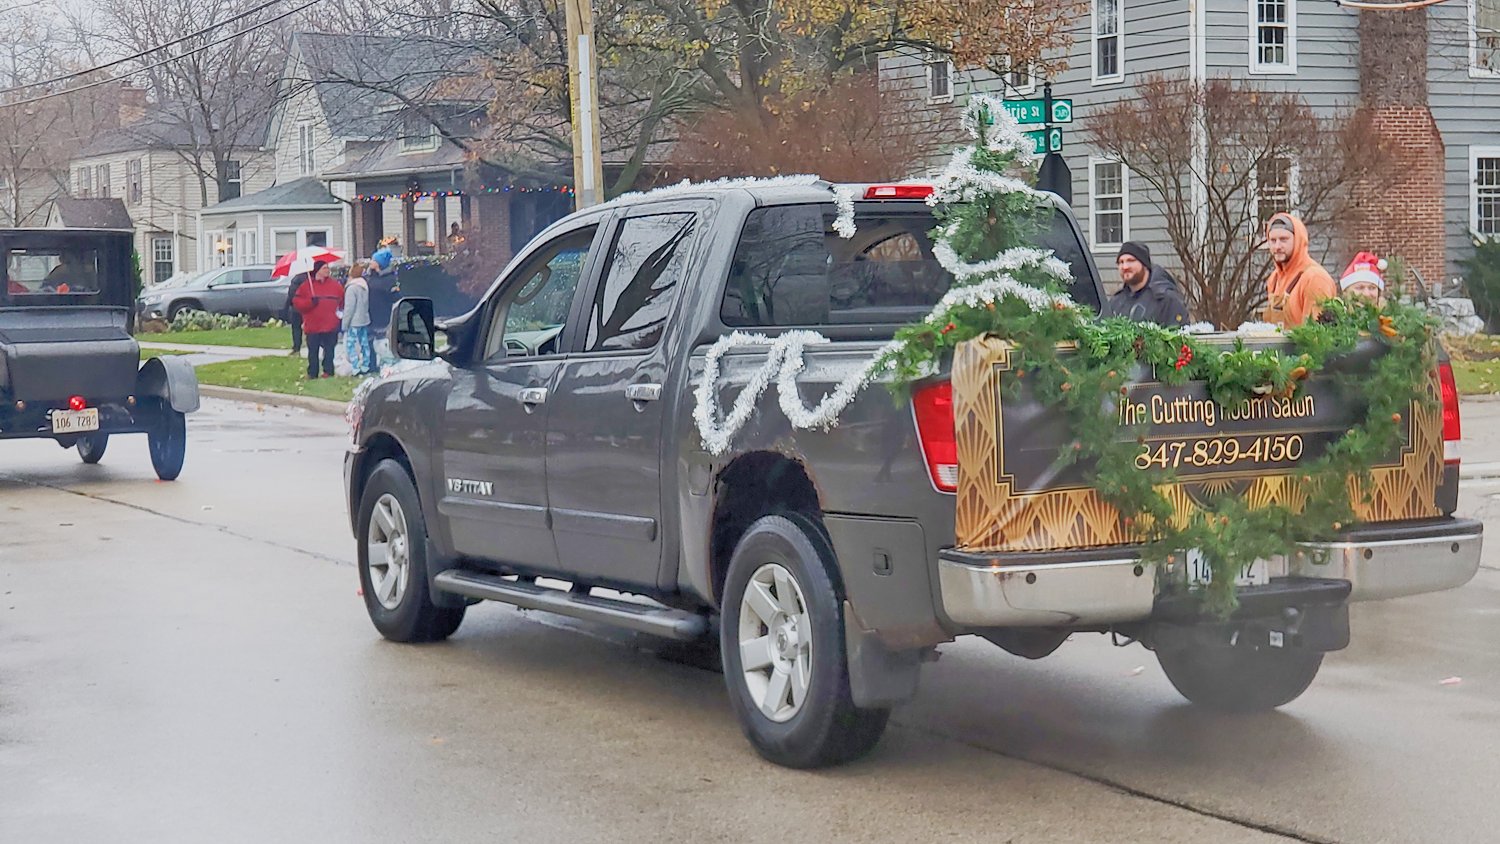 The Cutting Room Salon truck tree parade entry.